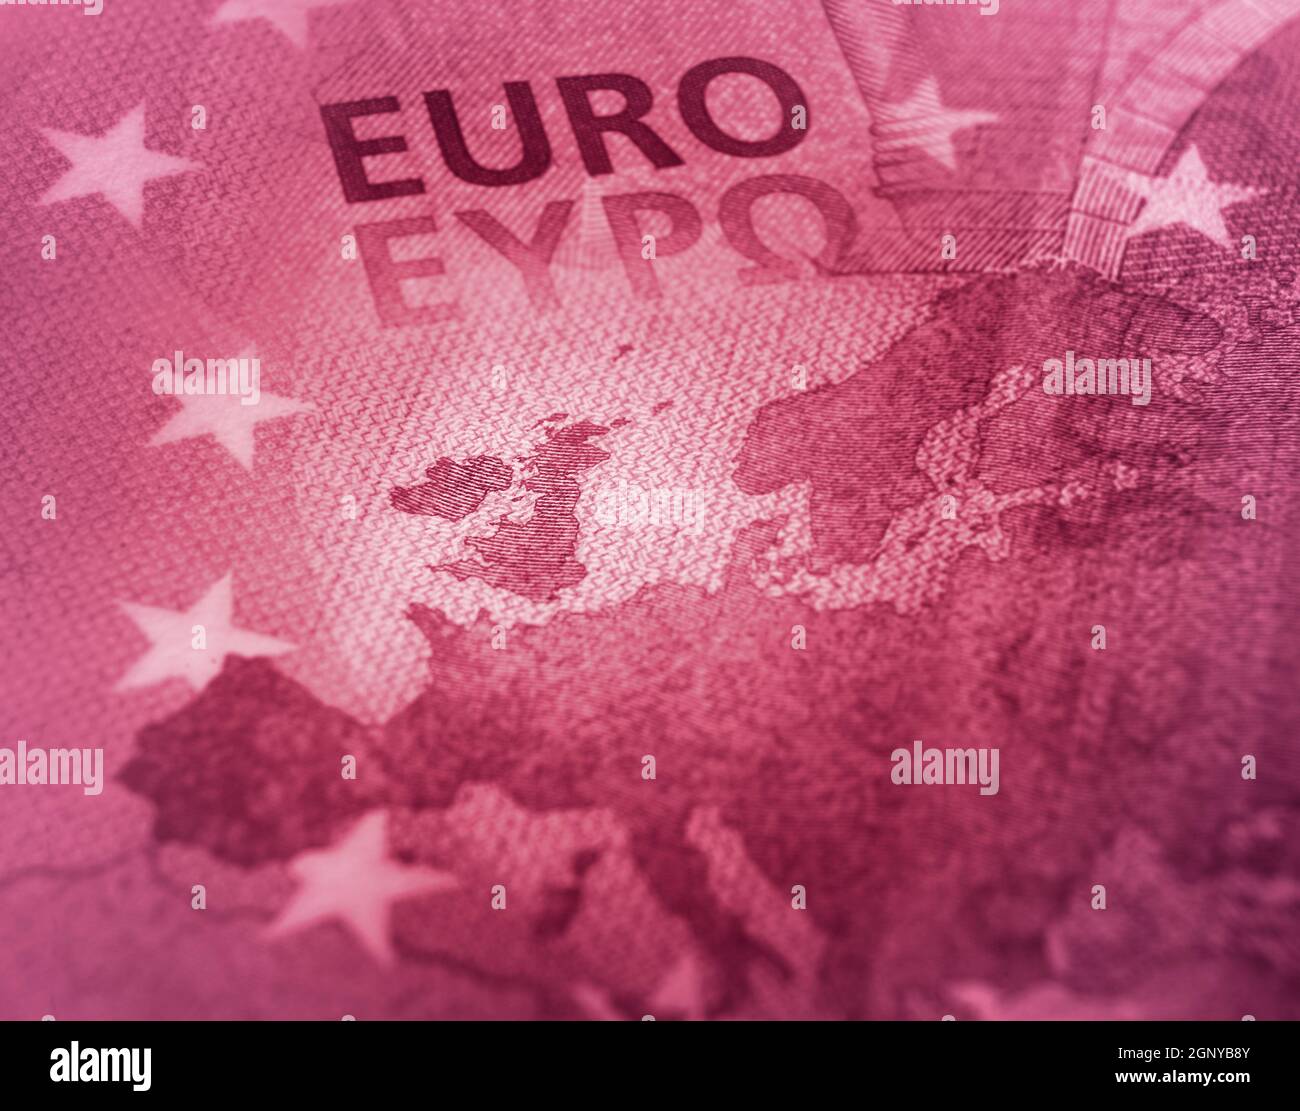 Abstract design. Unfocused Euro bill close up detail of Europe map with focus on Great Britain. Red color tone. Stock Photo